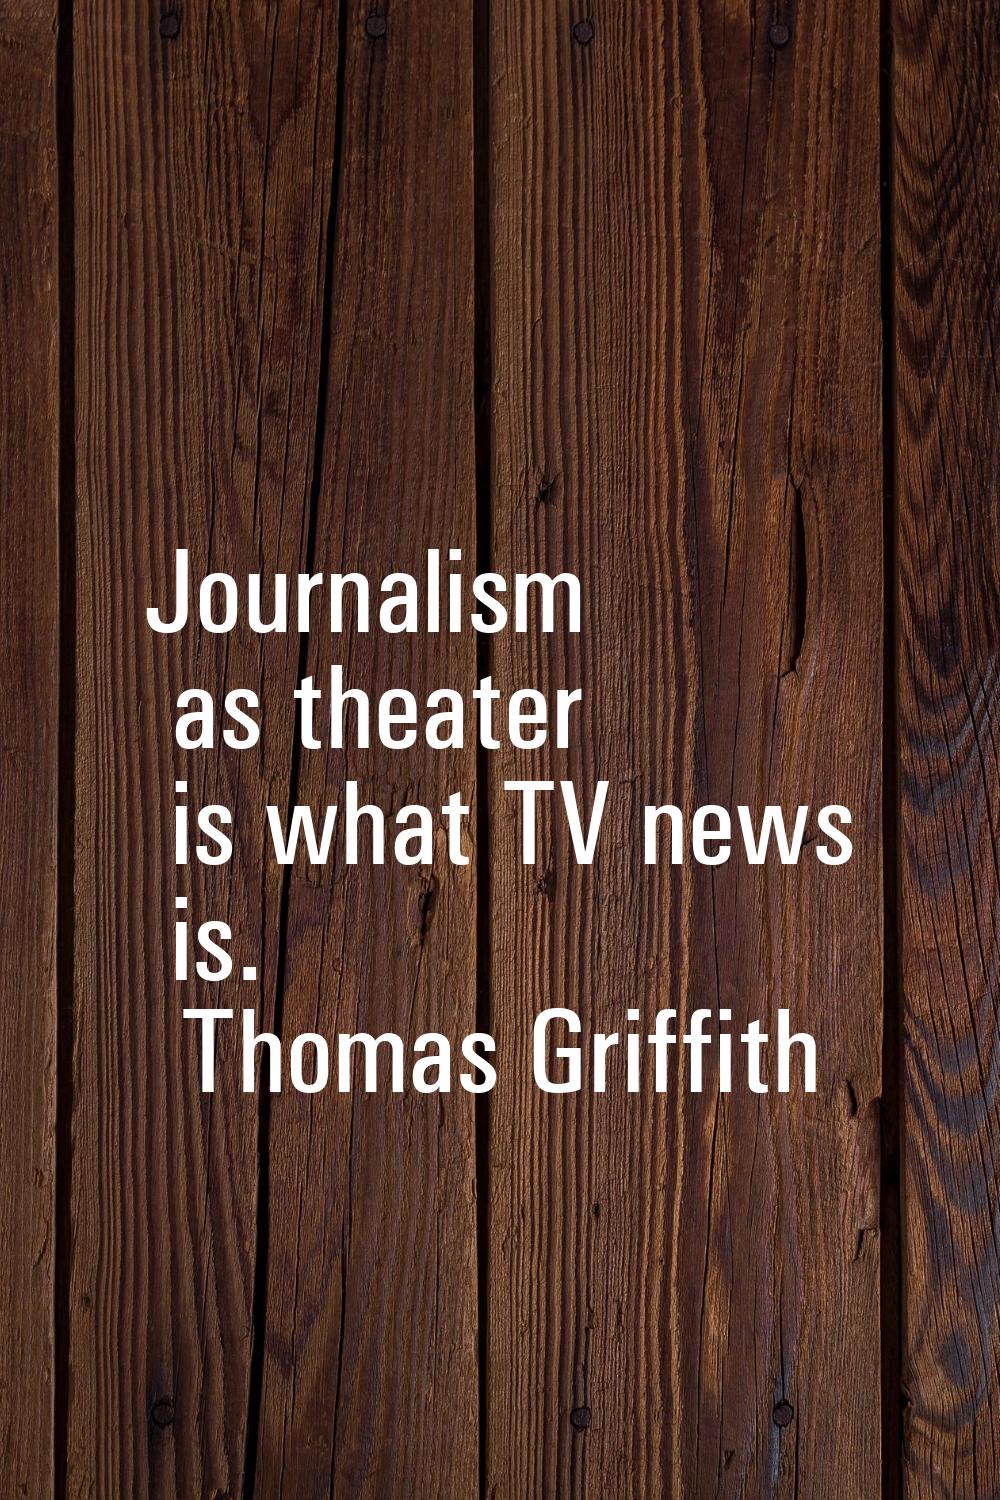 Journalism as theater is what TV news is.